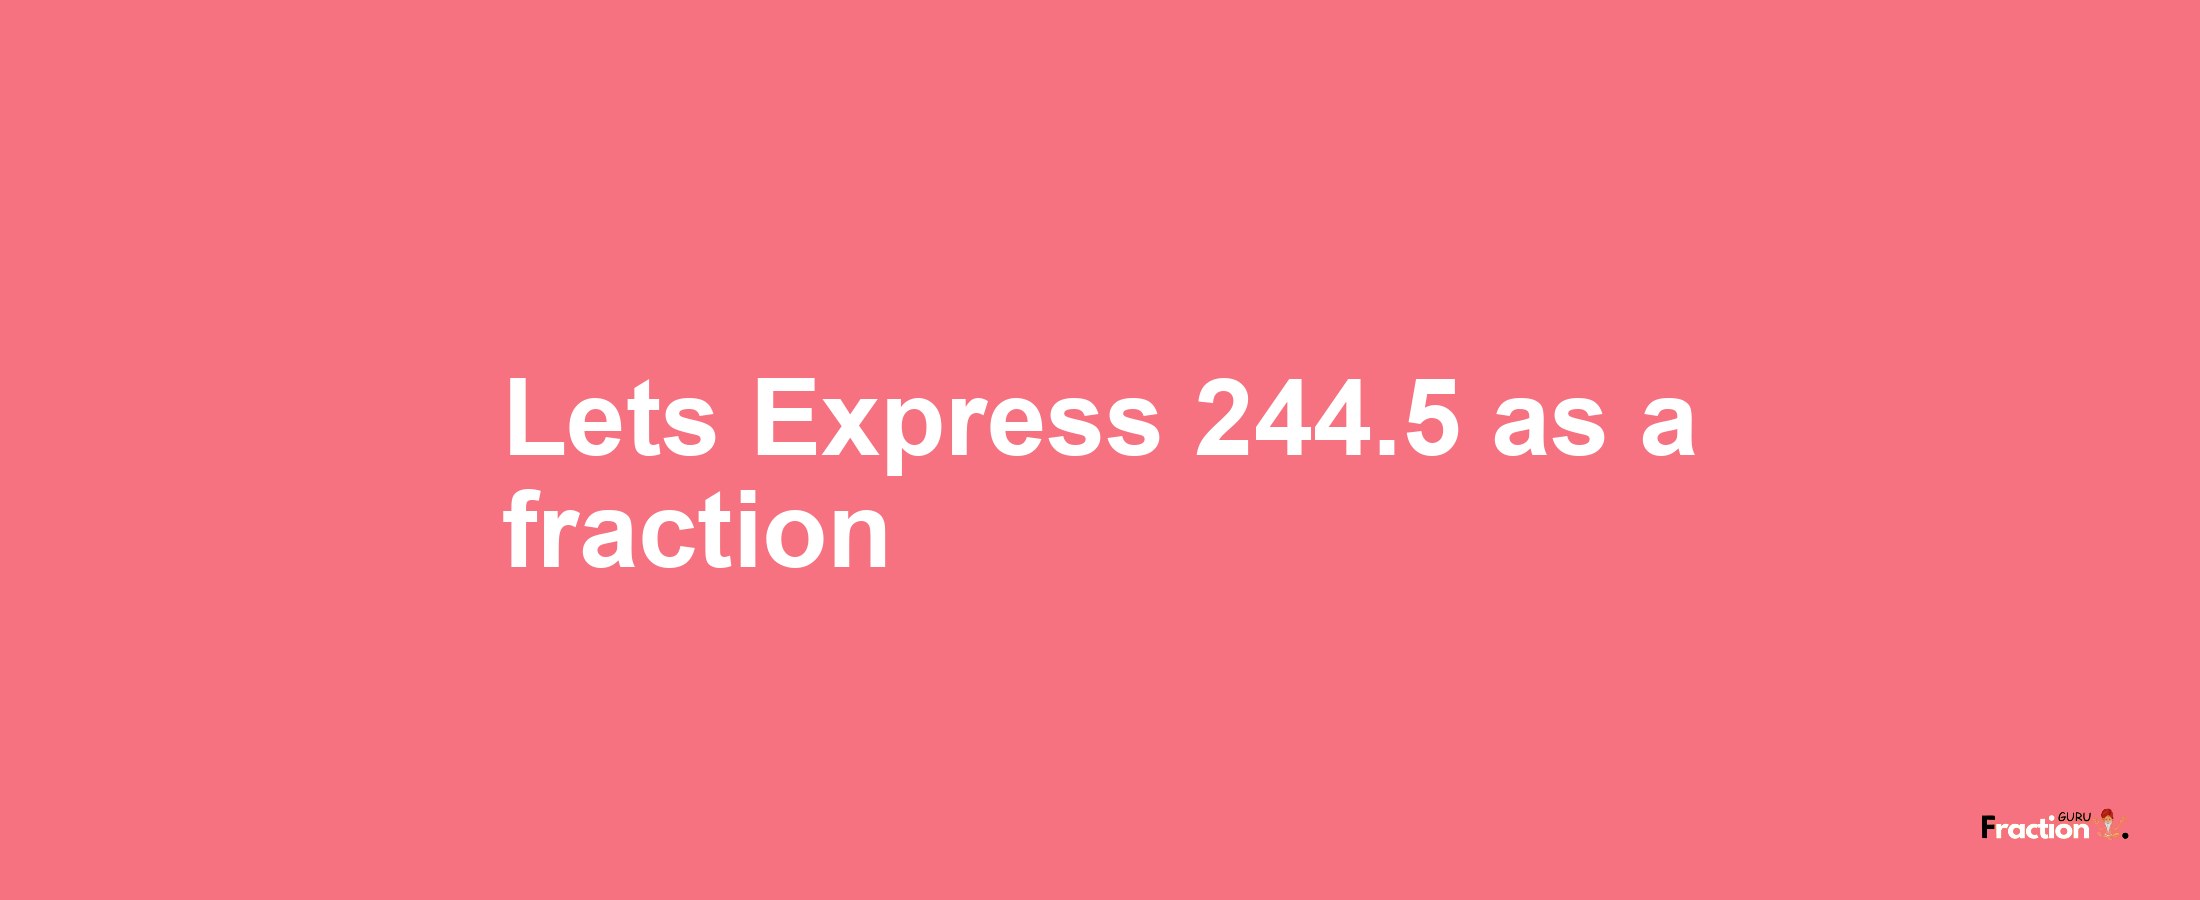 Lets Express 244.5 as afraction